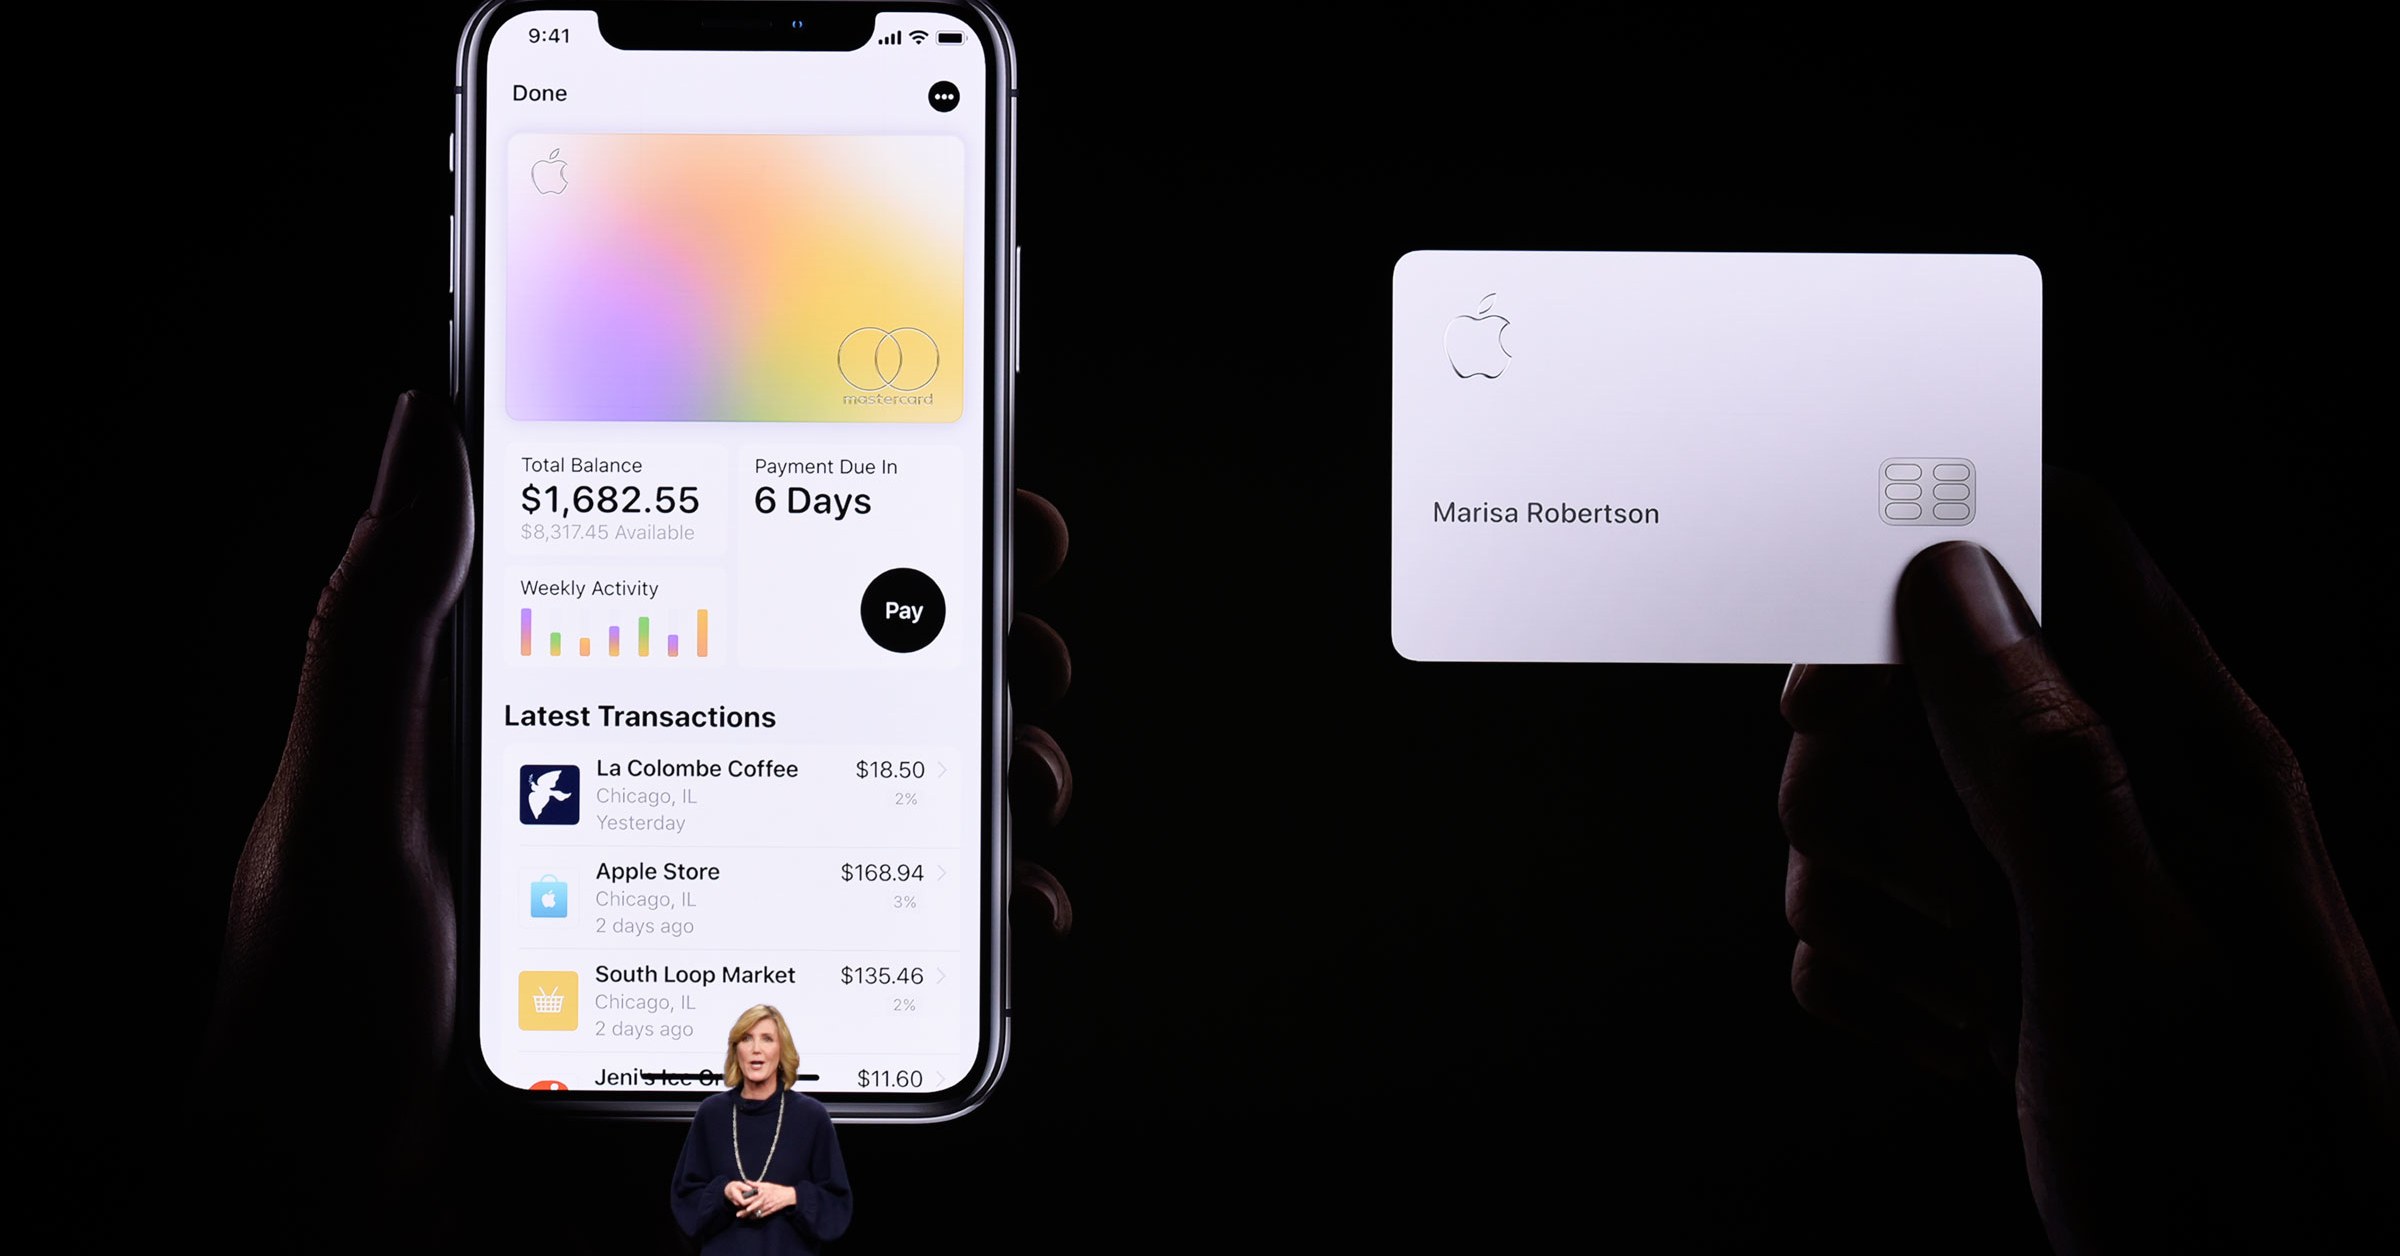 Apple Card Highlights Disruption Potential for Tech Industry